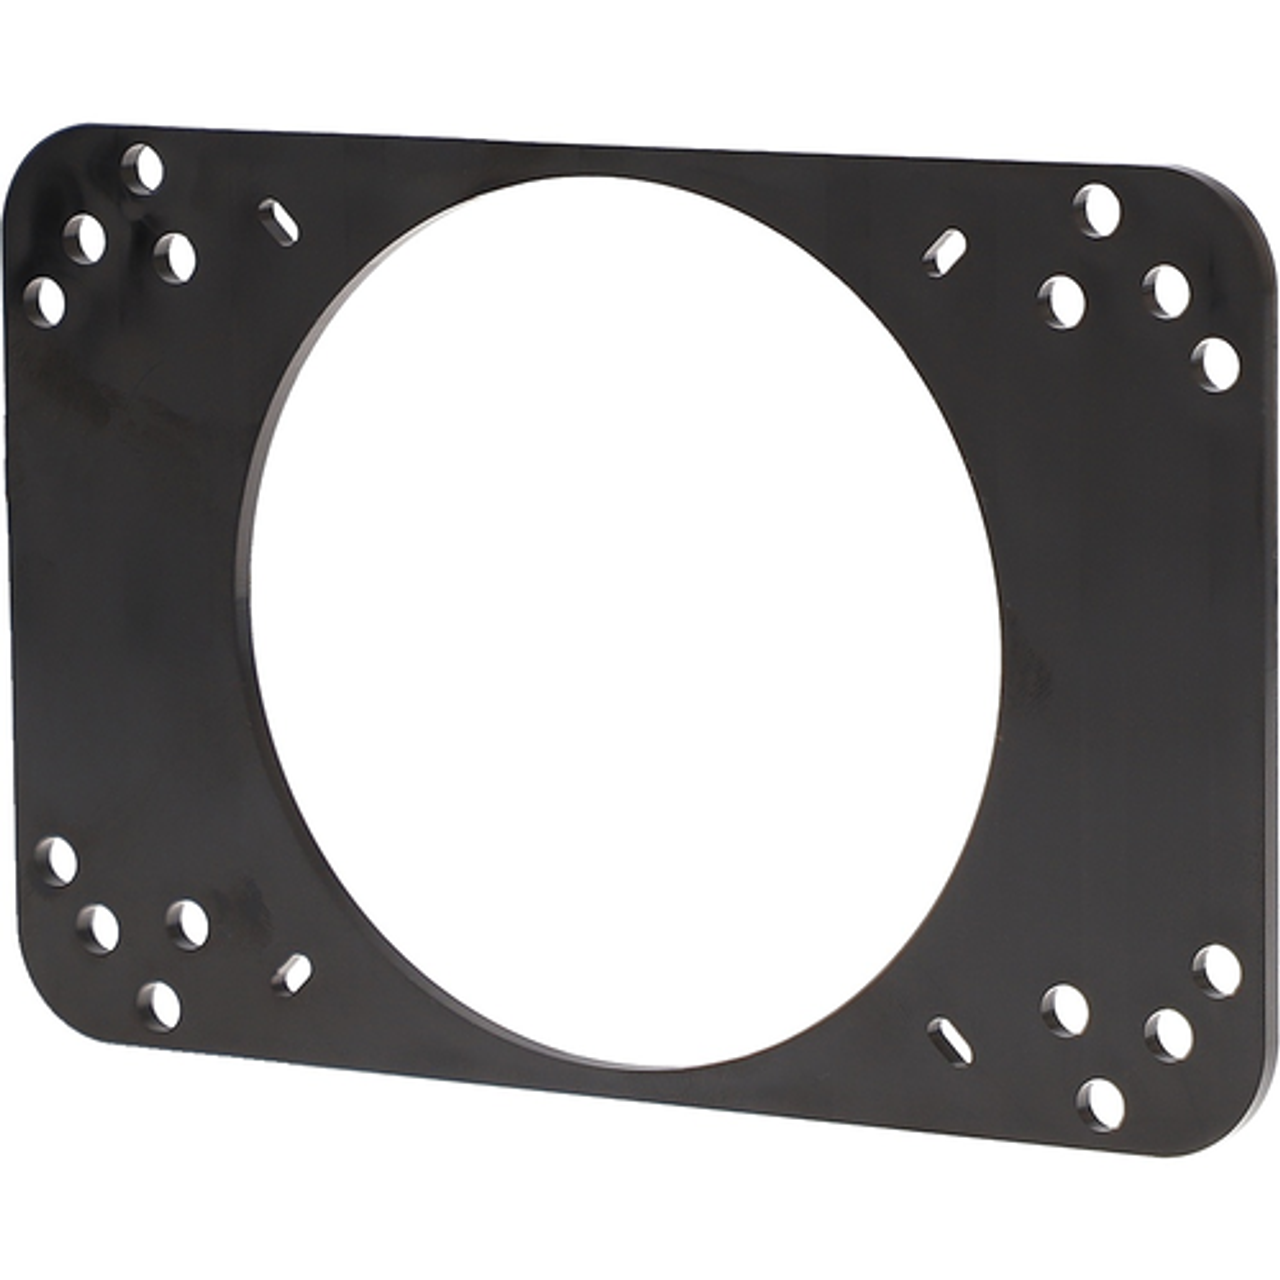 Metra - Speaker Adapter Plates for Most Vehicles (2-Pack) - Black